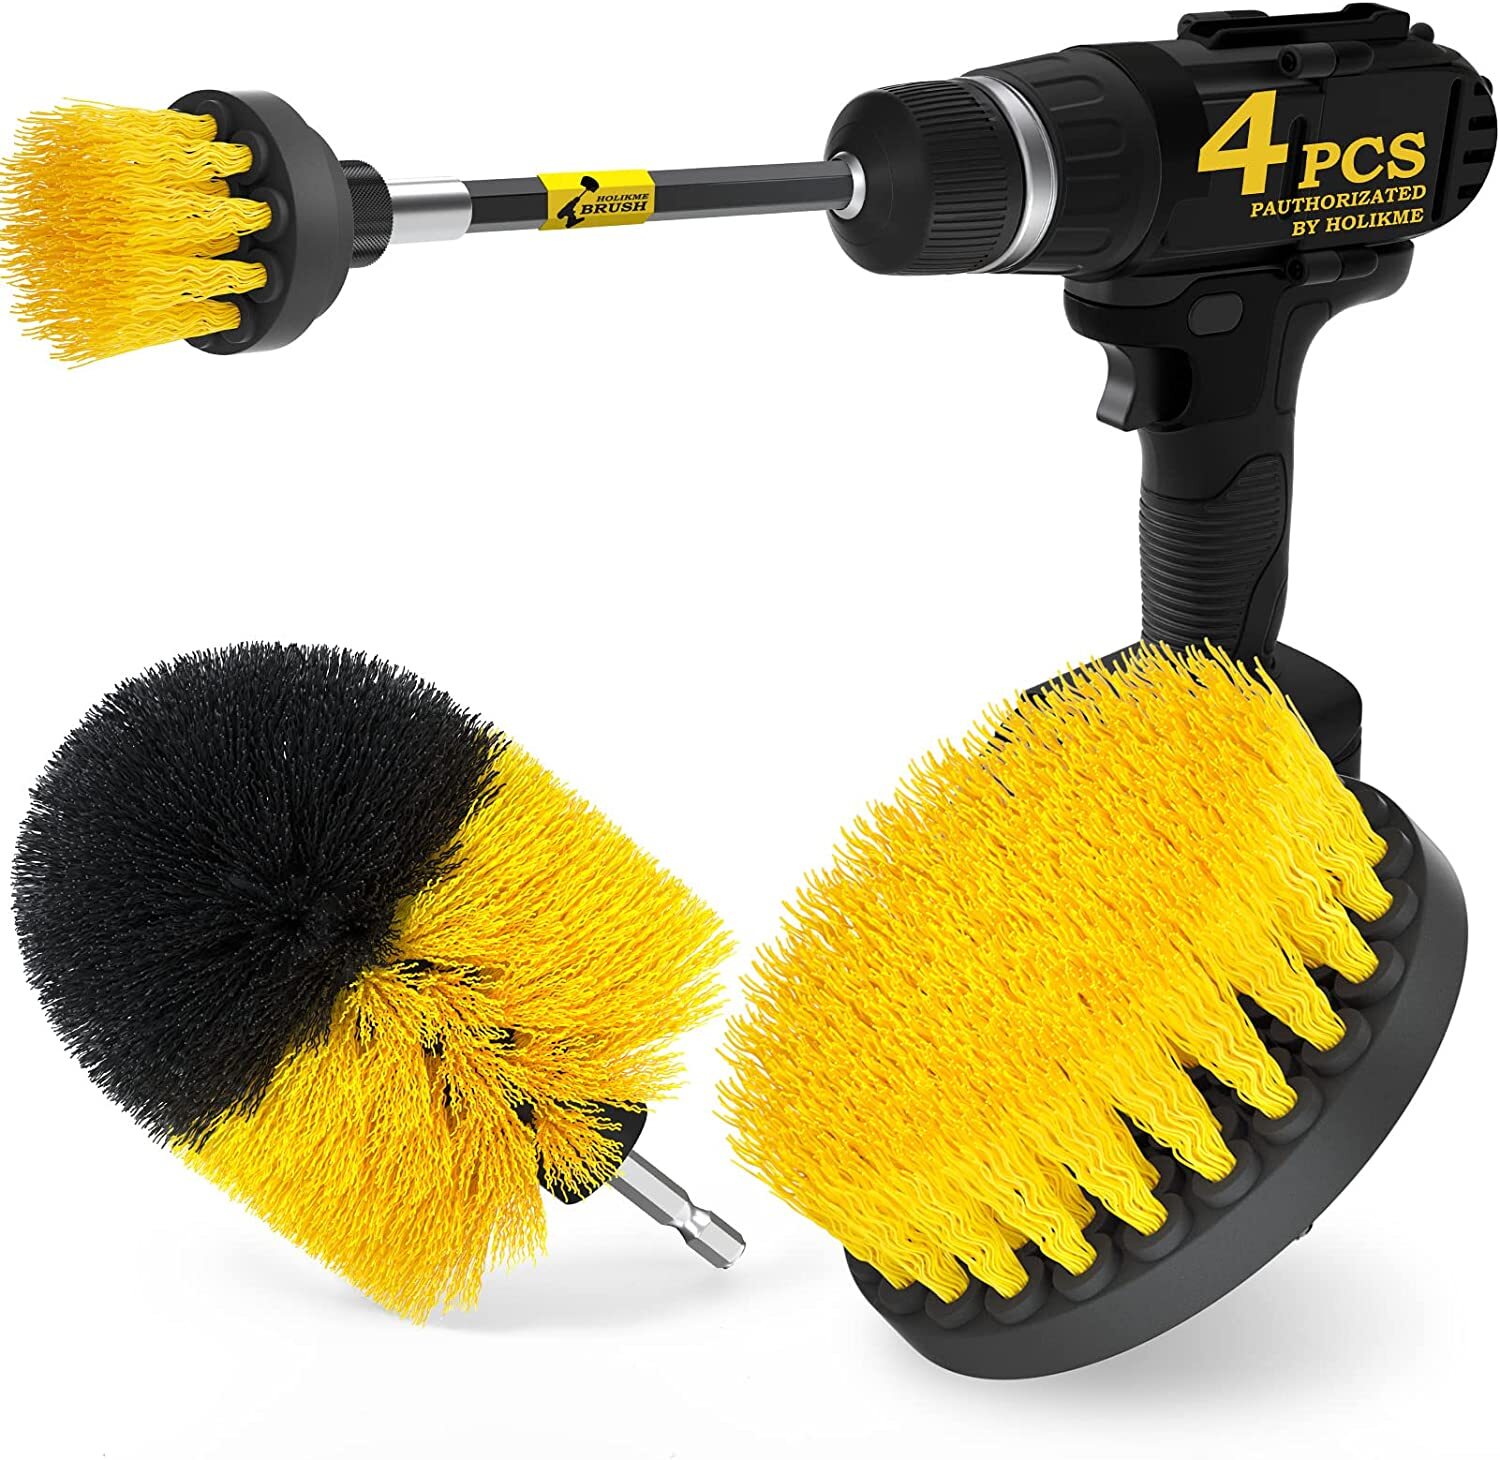 Electric Drill Brushes, Drill Brush Set: Power Scrub Away Grime